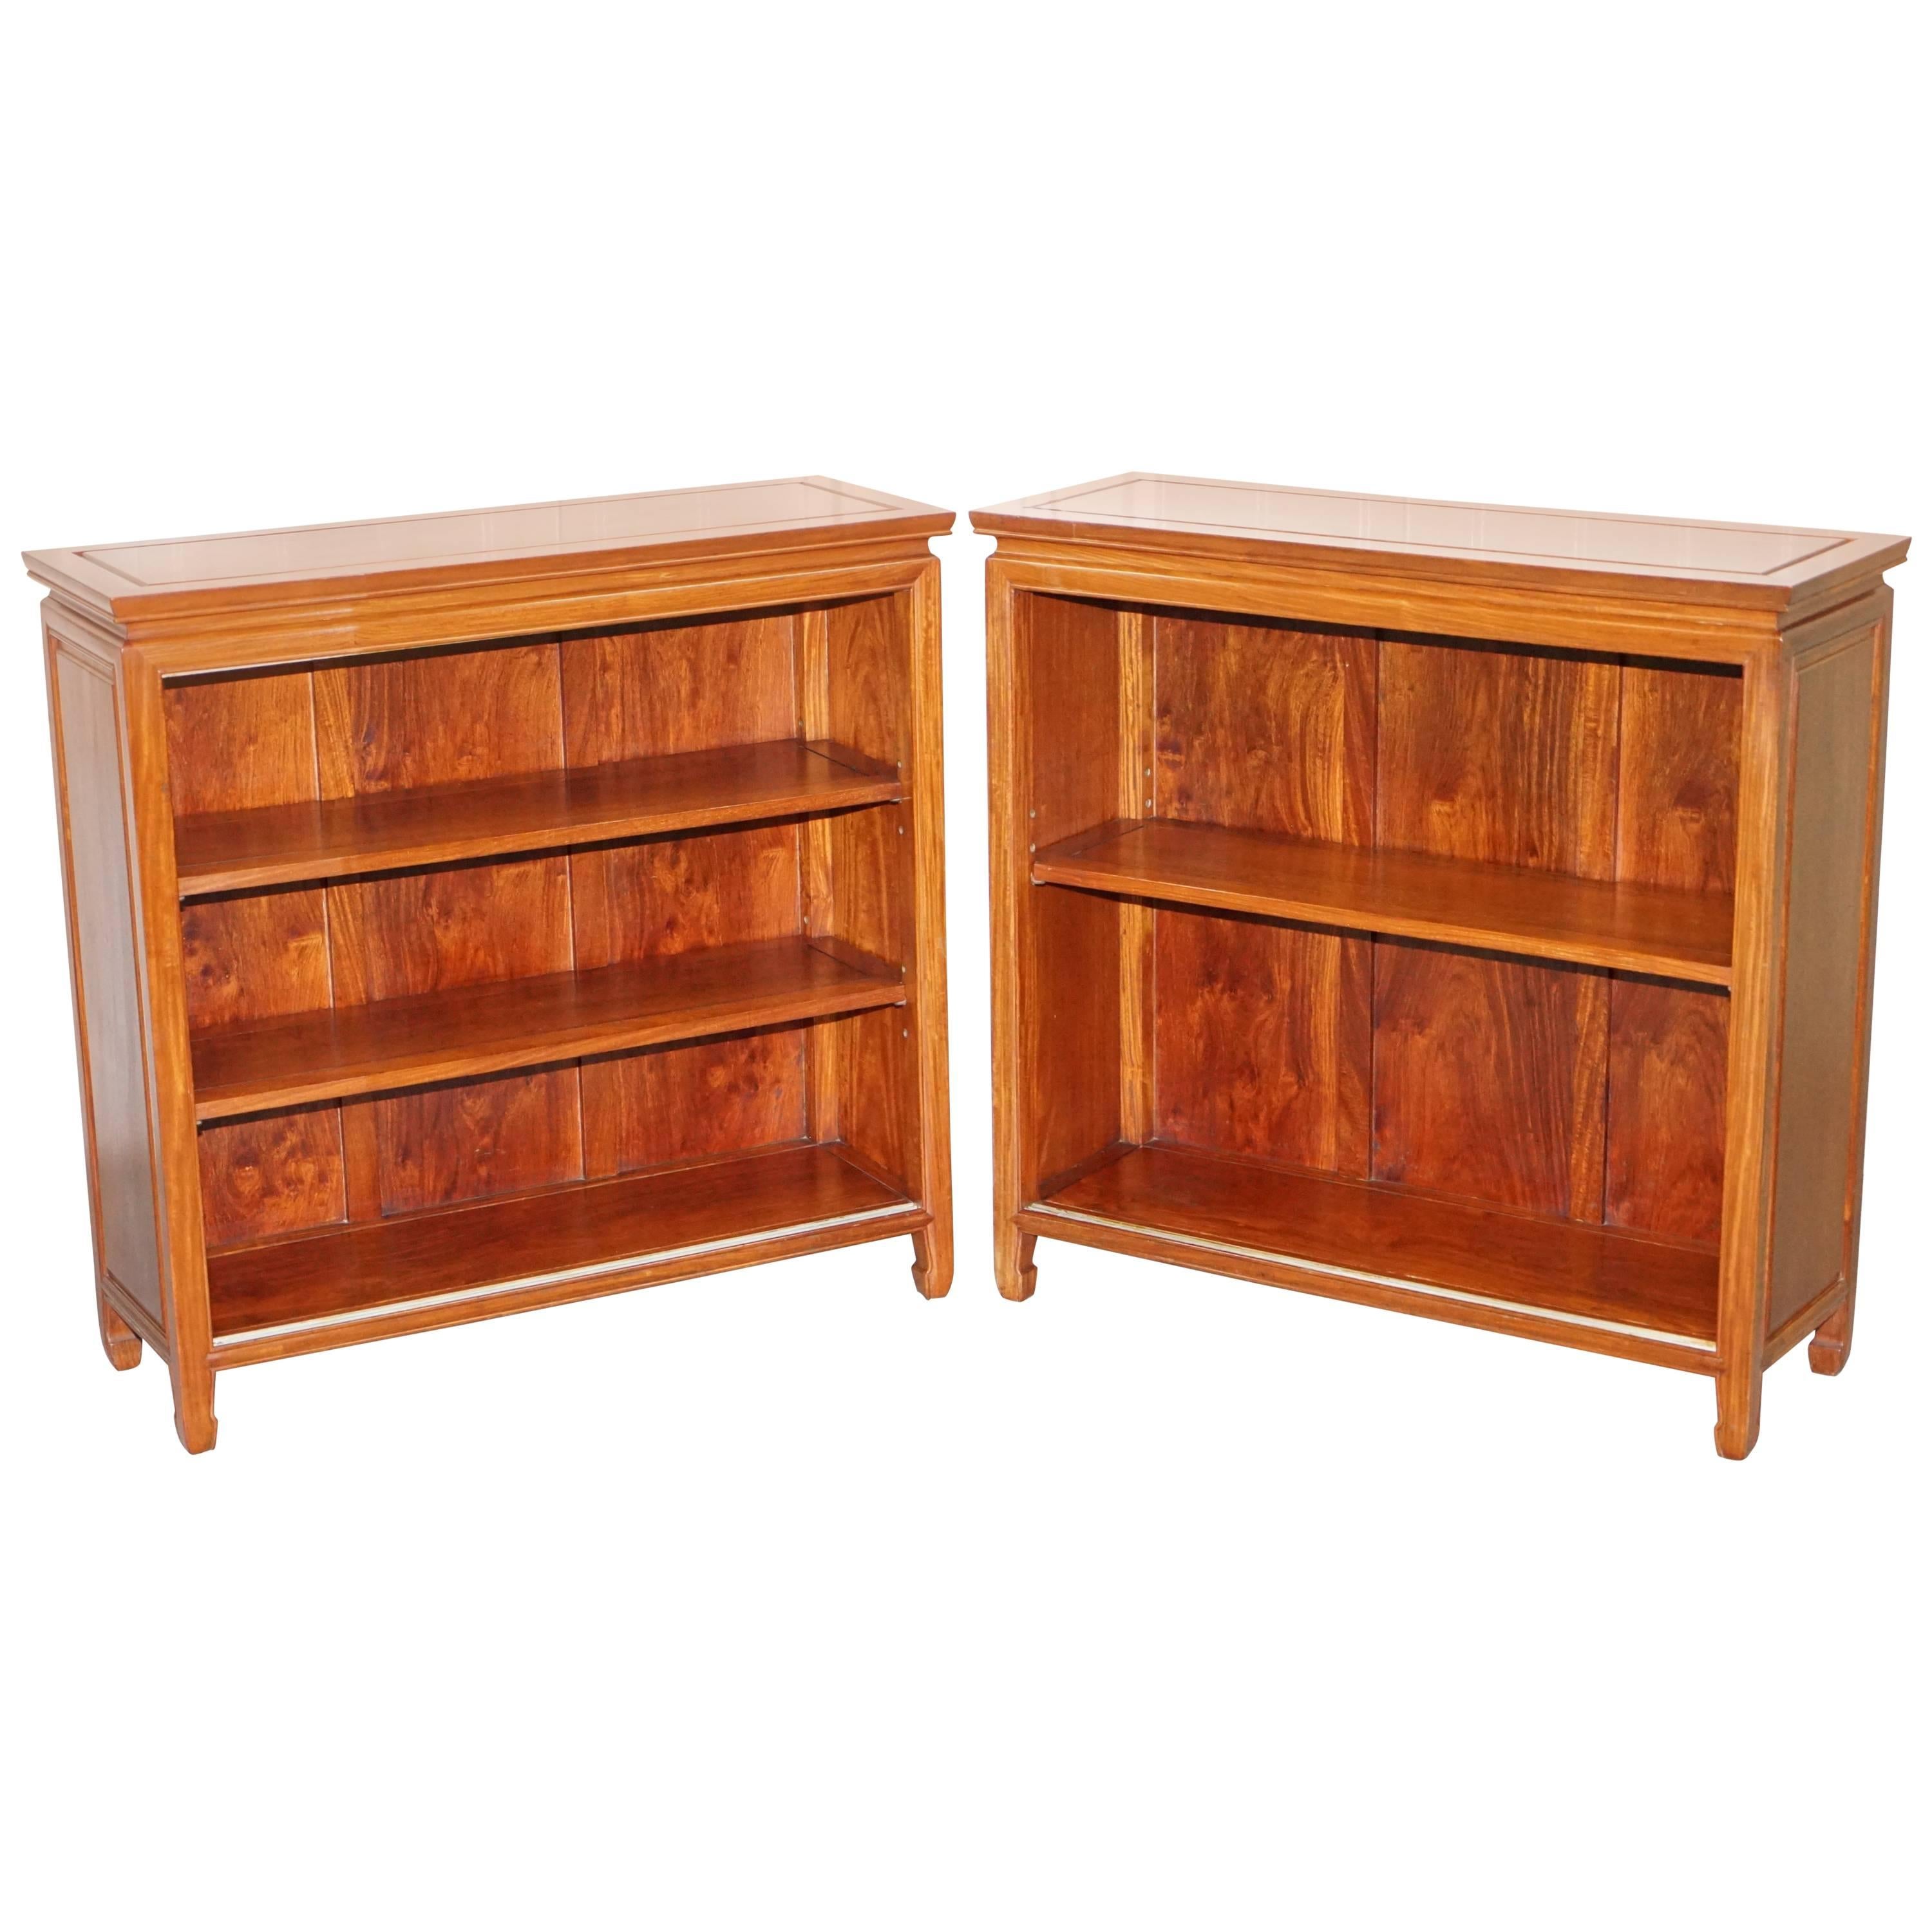 Lovely Pair of Walnut Dwarf Open Bookcases Lovely Timber Patina